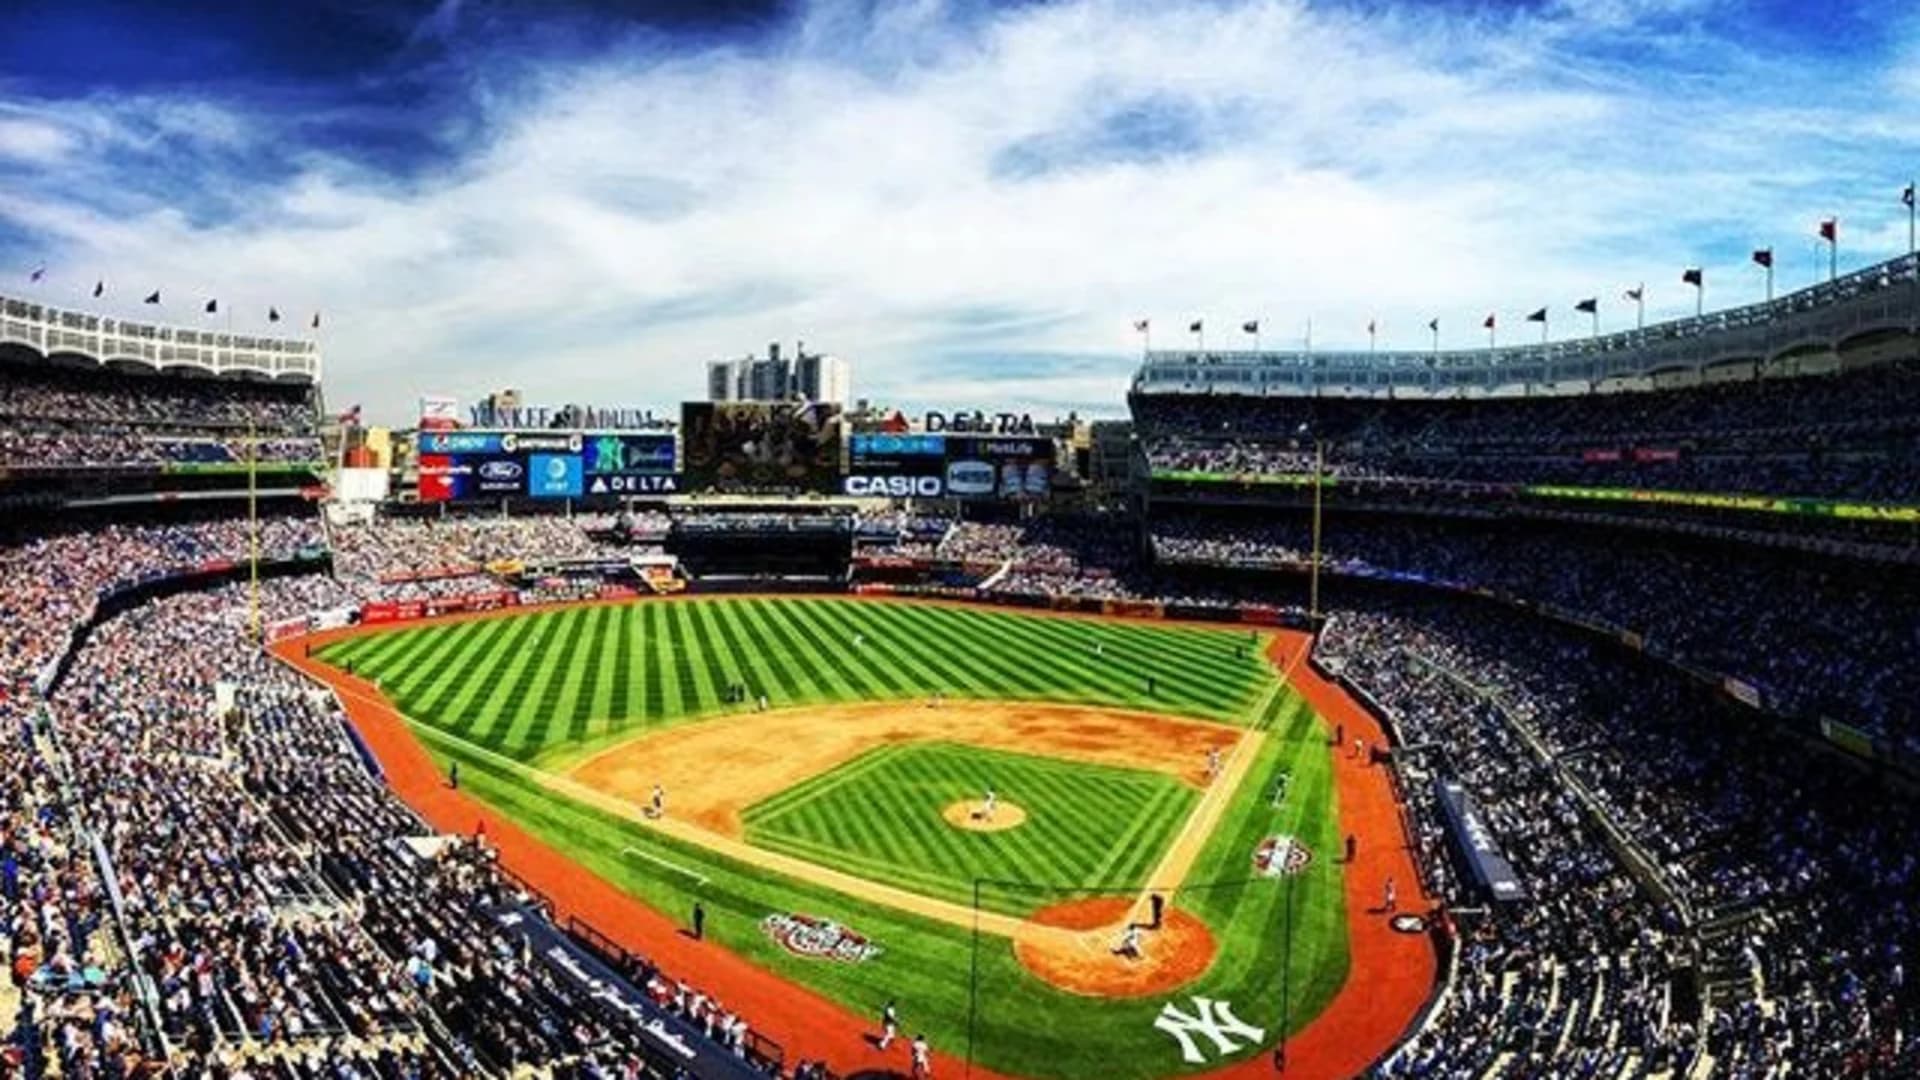 Your Photos: Yankees Opening Day